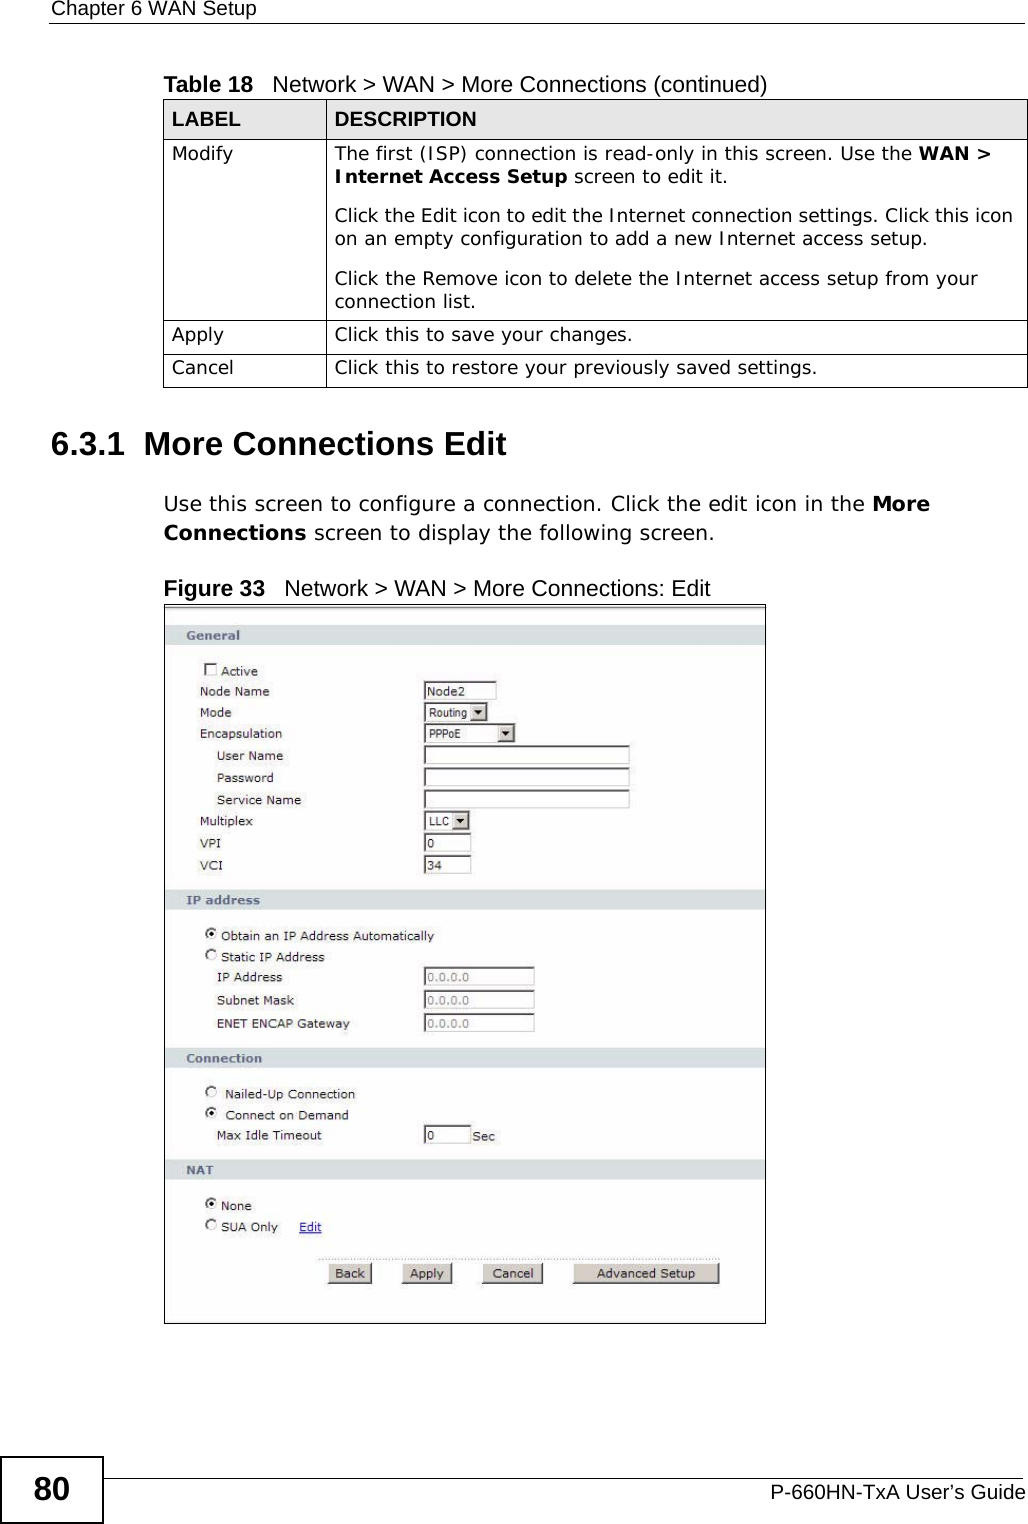 Chapter 6 WAN SetupP-660HN-TxA User’s Guide806.3.1  More Connections EditUse this screen to configure a connection. Click the edit icon in the More Connections screen to display the following screen.Figure 33   Network &gt; WAN &gt; More Connections: EditModify The first (ISP) connection is read-only in this screen. Use the WAN &gt; Internet Access Setup screen to edit it.Click the Edit icon to edit the Internet connection settings. Click this icon on an empty configuration to add a new Internet access setup.Click the Remove icon to delete the Internet access setup from your connection list.Apply Click this to save your changes. Cancel Click this to restore your previously saved settings.Table 18   Network &gt; WAN &gt; More Connections (continued)LABEL DESCRIPTION